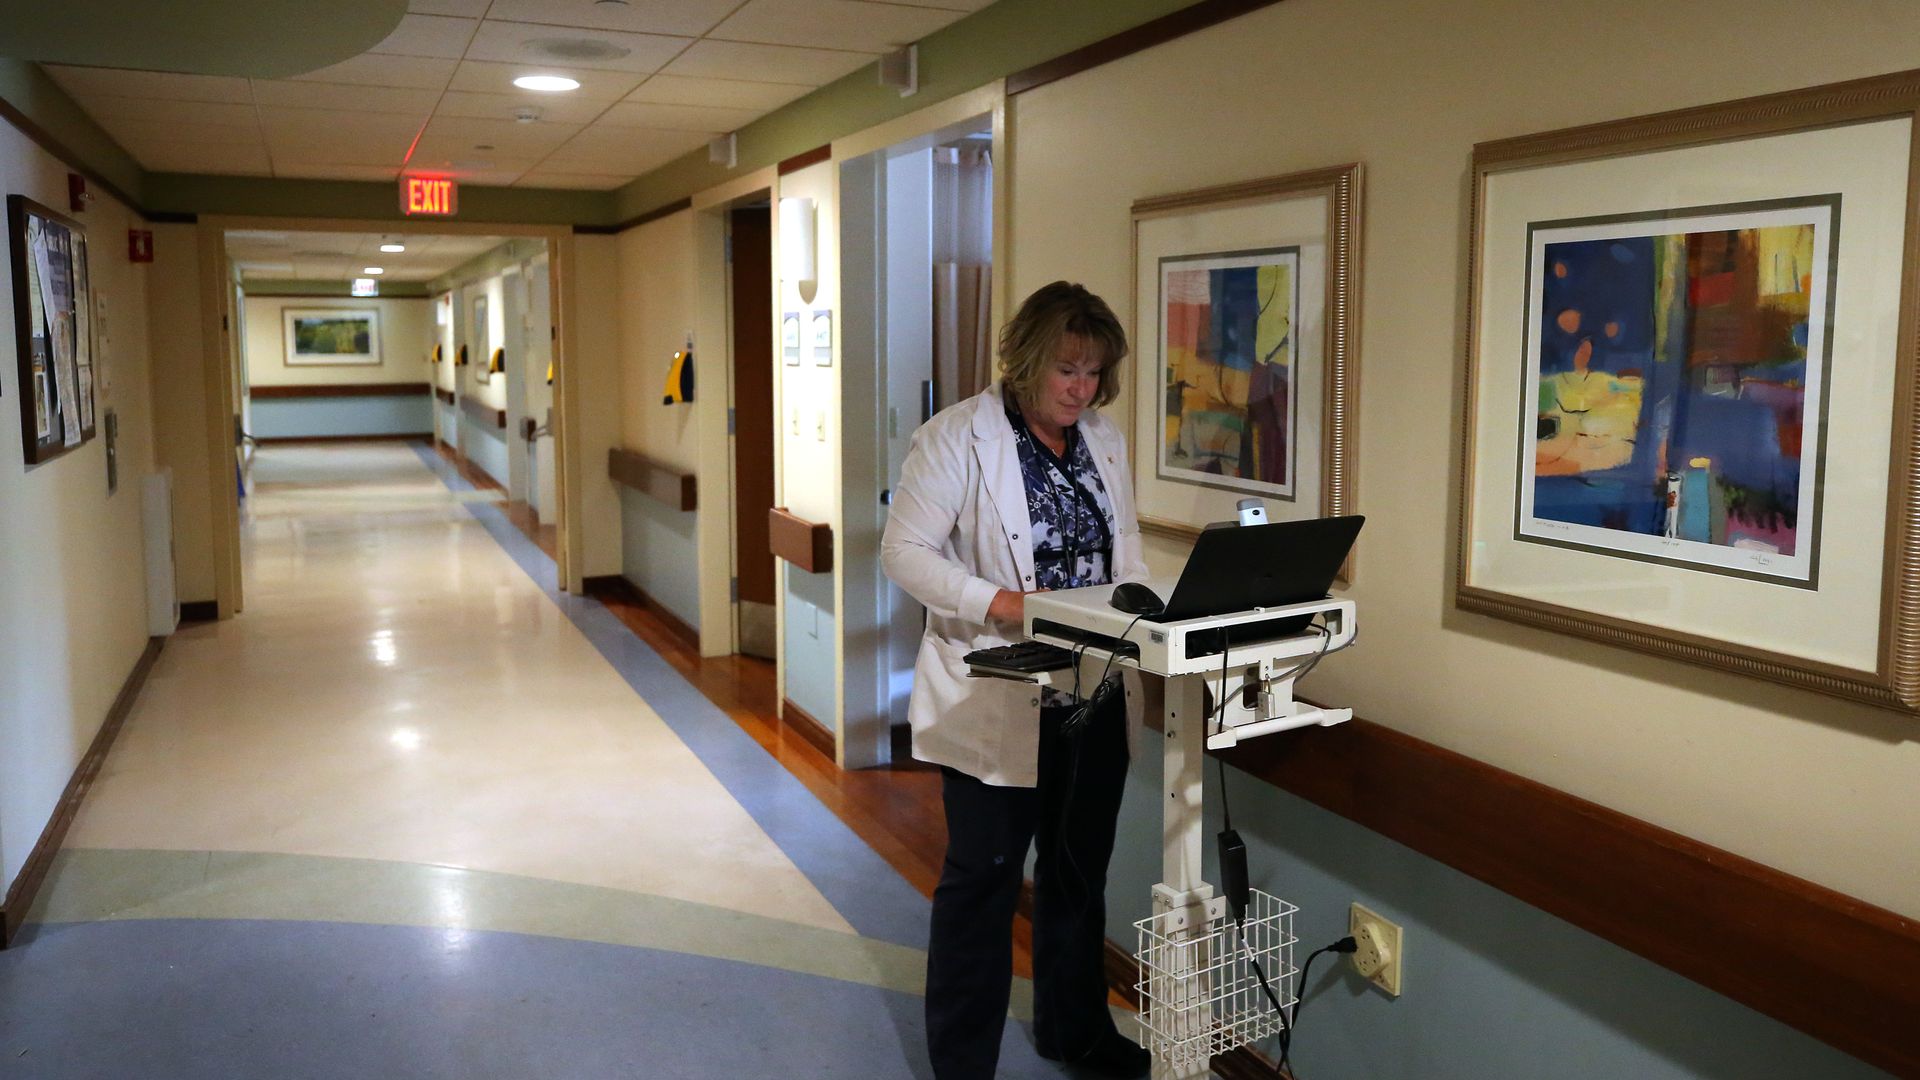 A doctor works on a laptop in the hallway of a hospital.